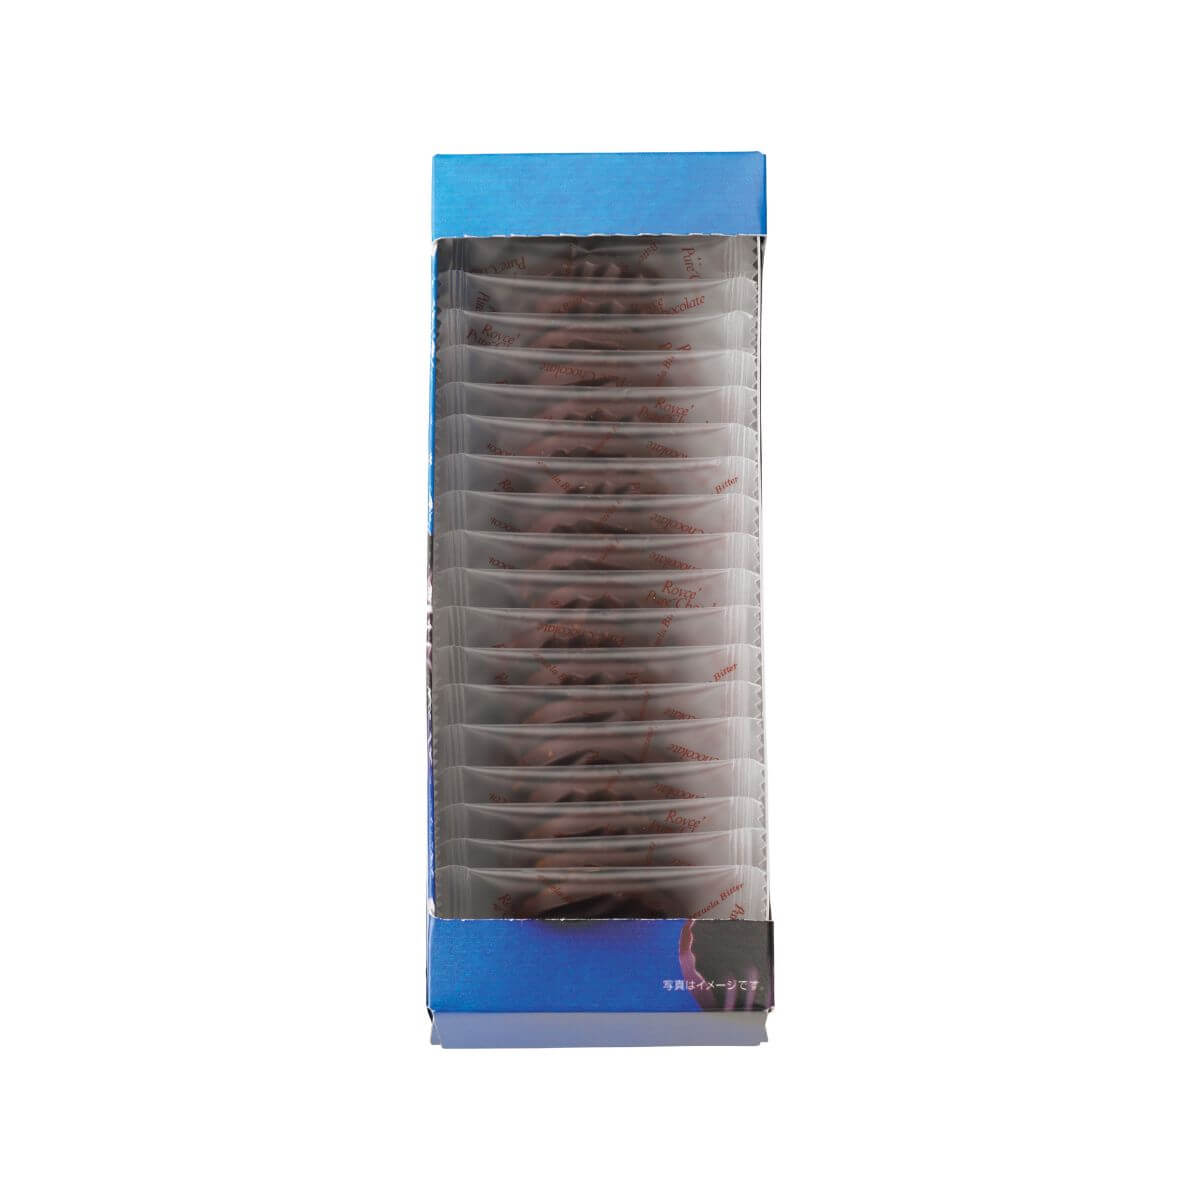 ROYCE' Chocolate - Pure Chocolate "Venezuela Bitter" - Image shows an open box with individually-wrapped chocolates inside.